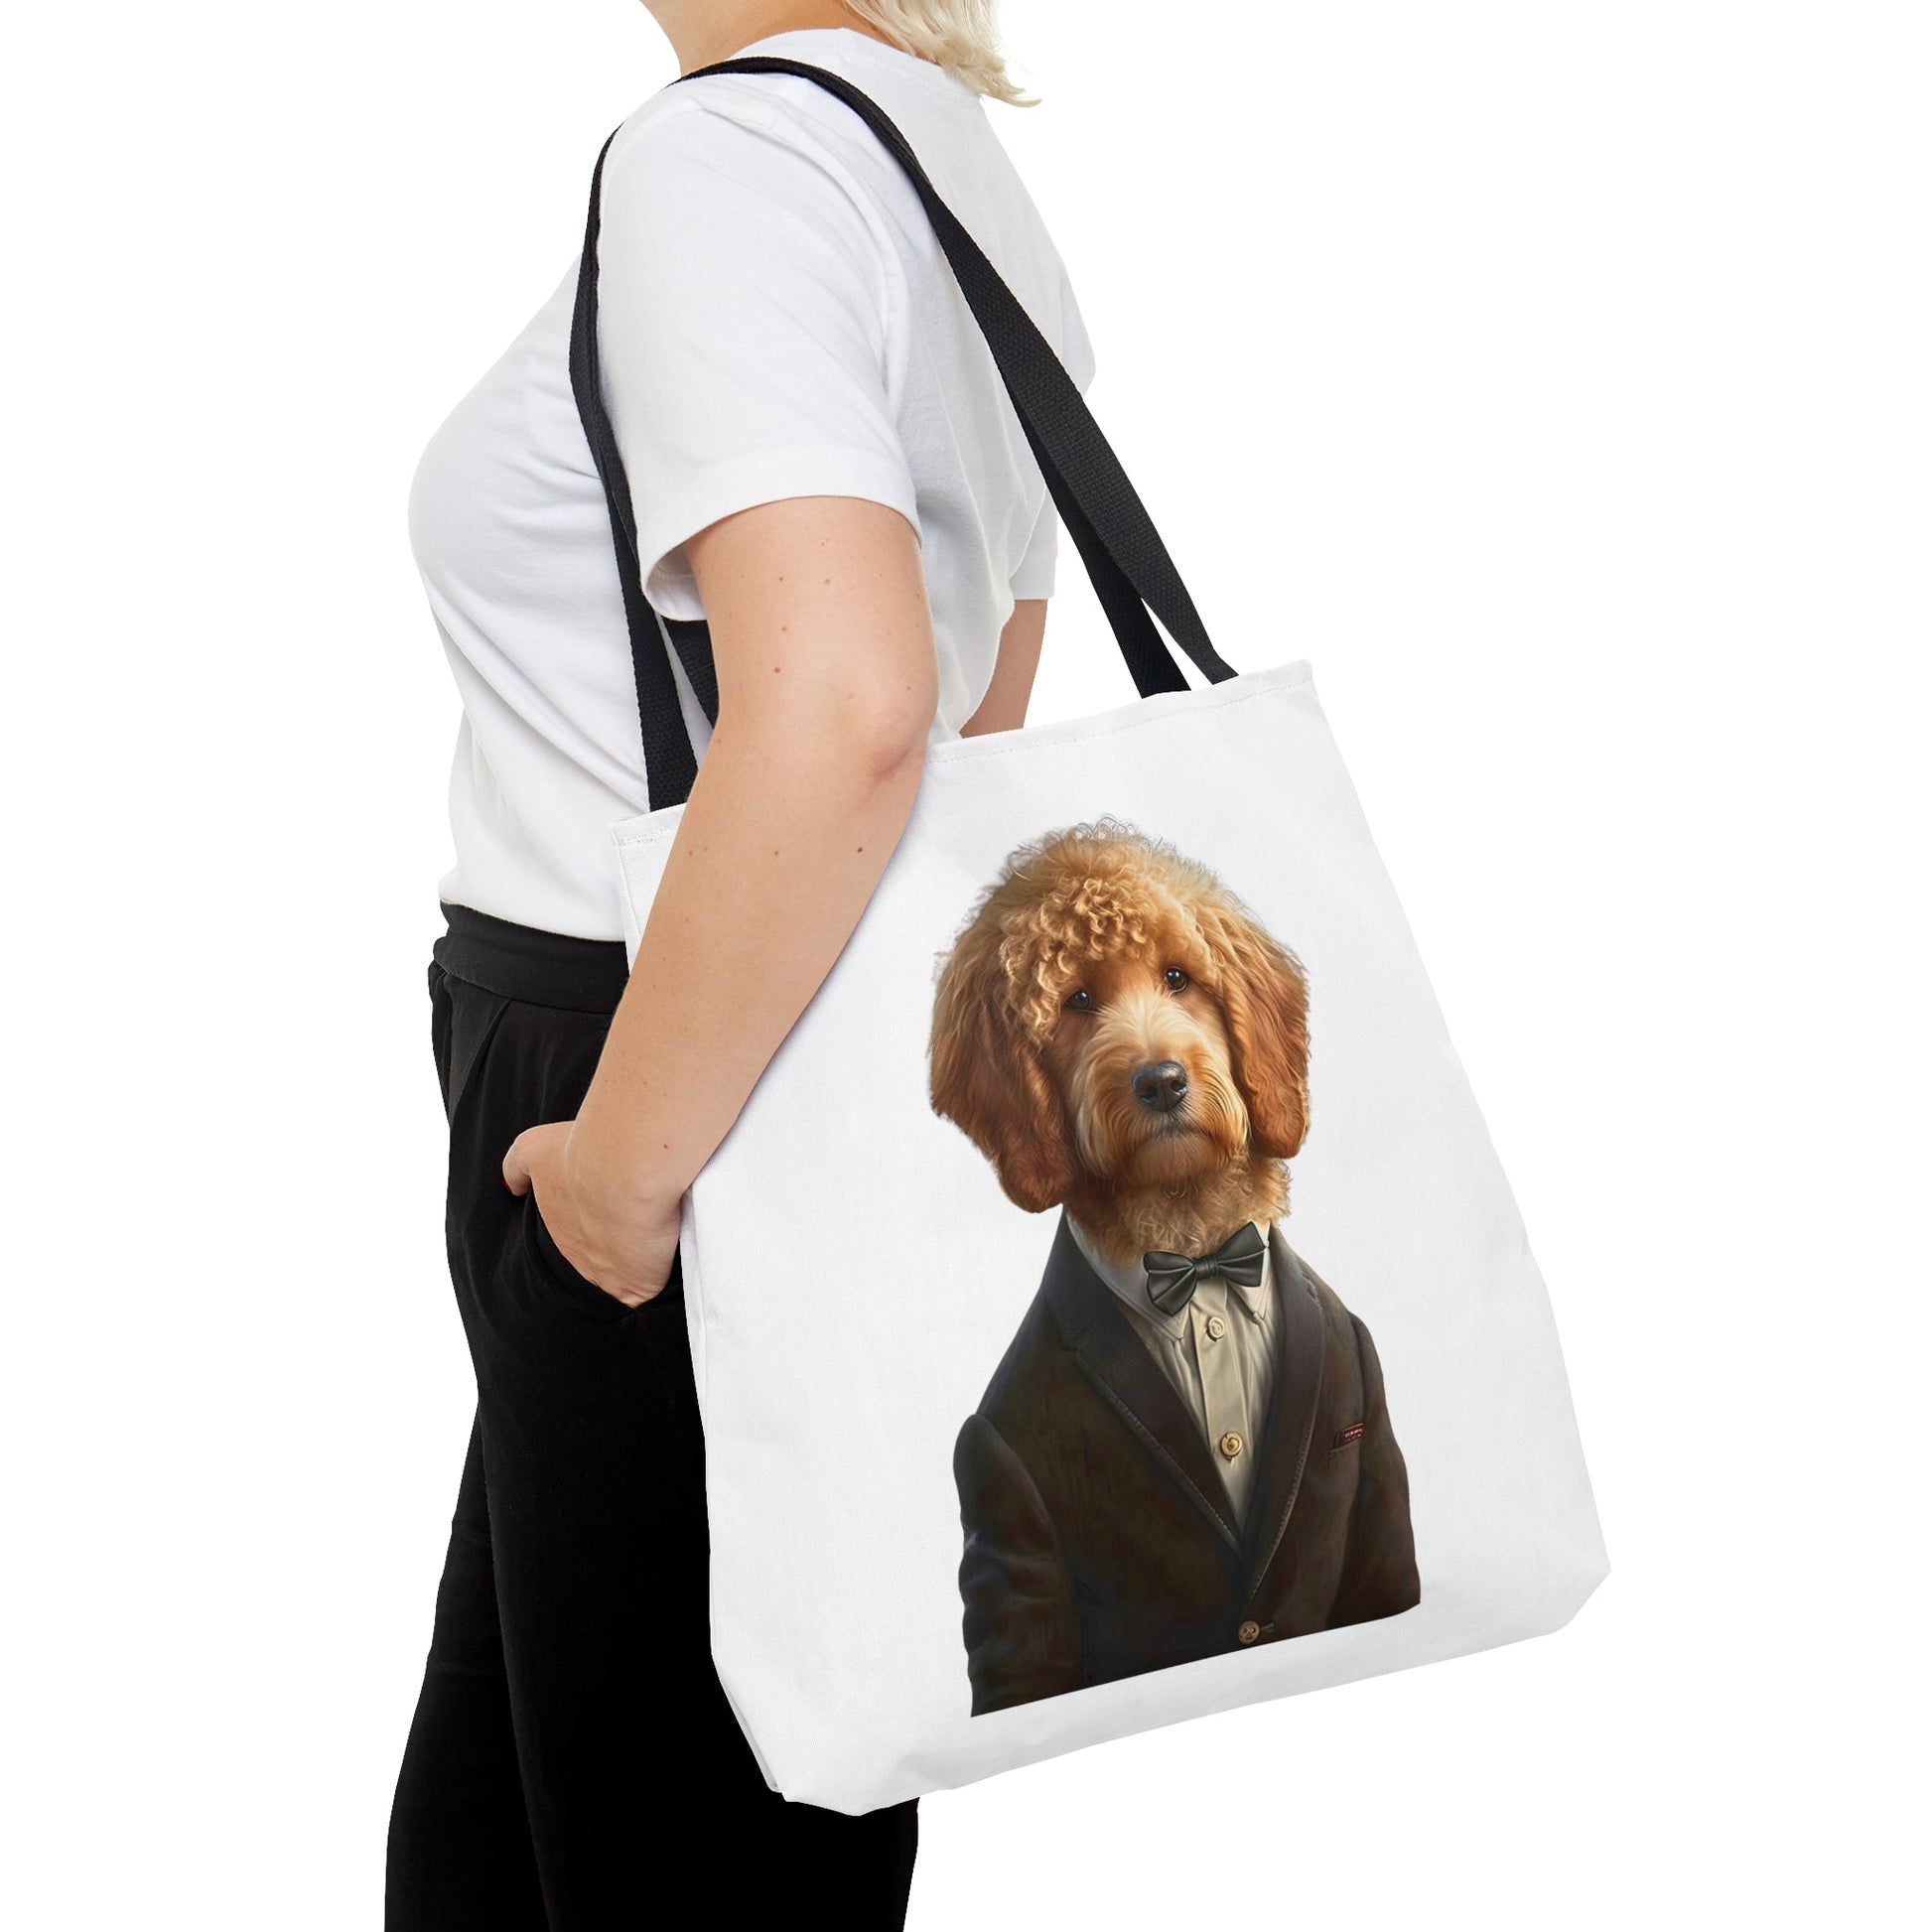 COOPER : Tote Bag - Shaggy Chic